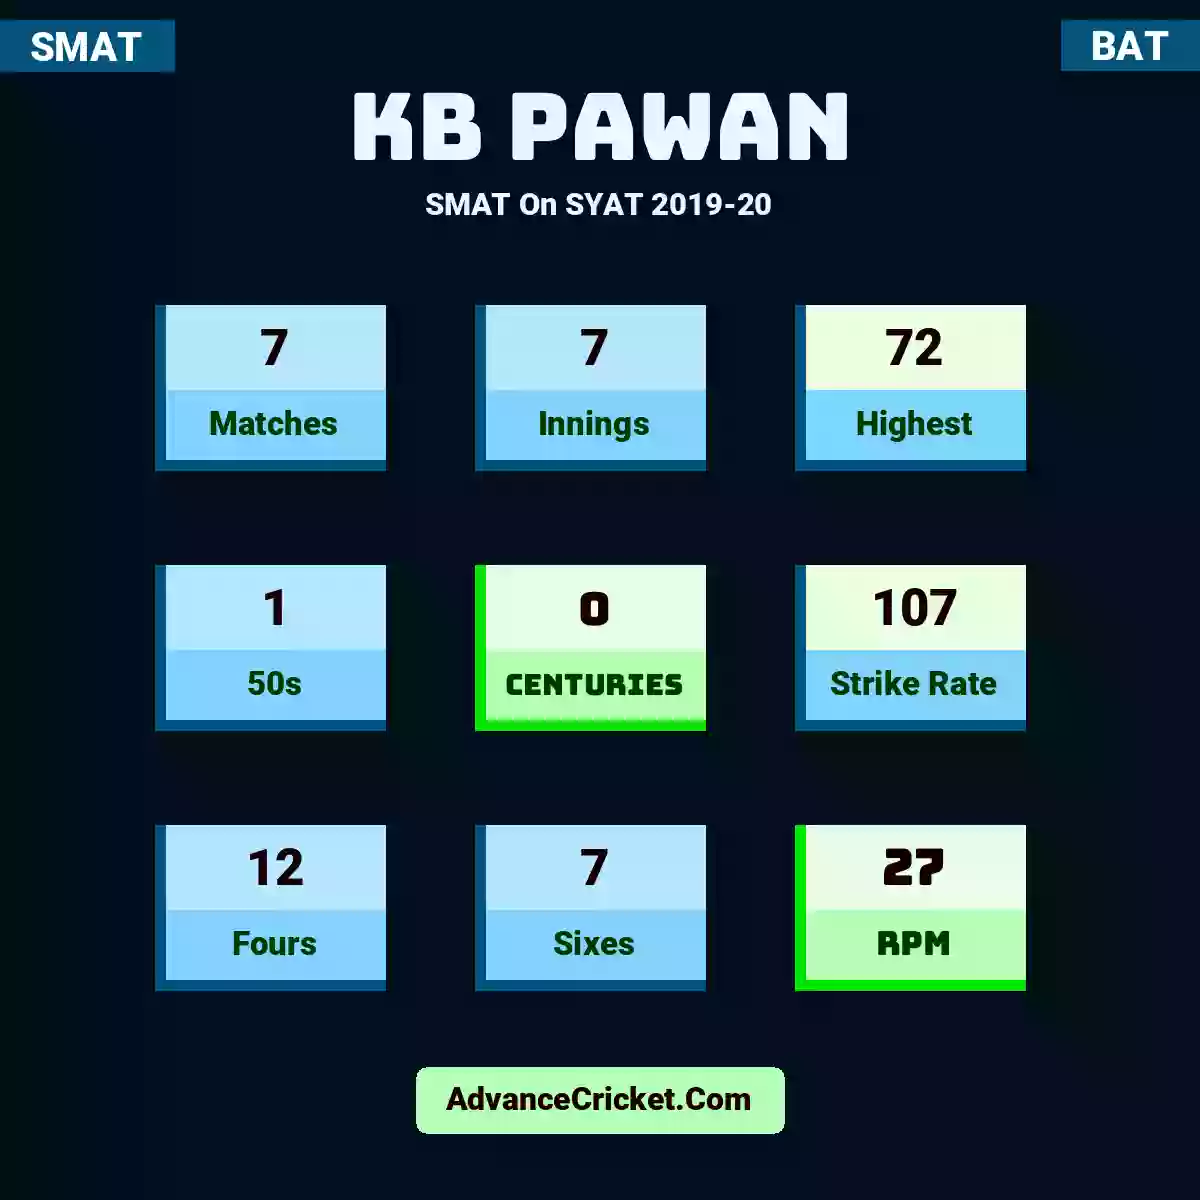 KB Pawan SMAT  On SYAT 2019-20, KB Pawan played 7 matches, scored 72 runs as highest, 1 half-centuries, and 0 centuries, with a strike rate of 107. K.Pawan hit 12 fours and 7 sixes, with an RPM of 27.